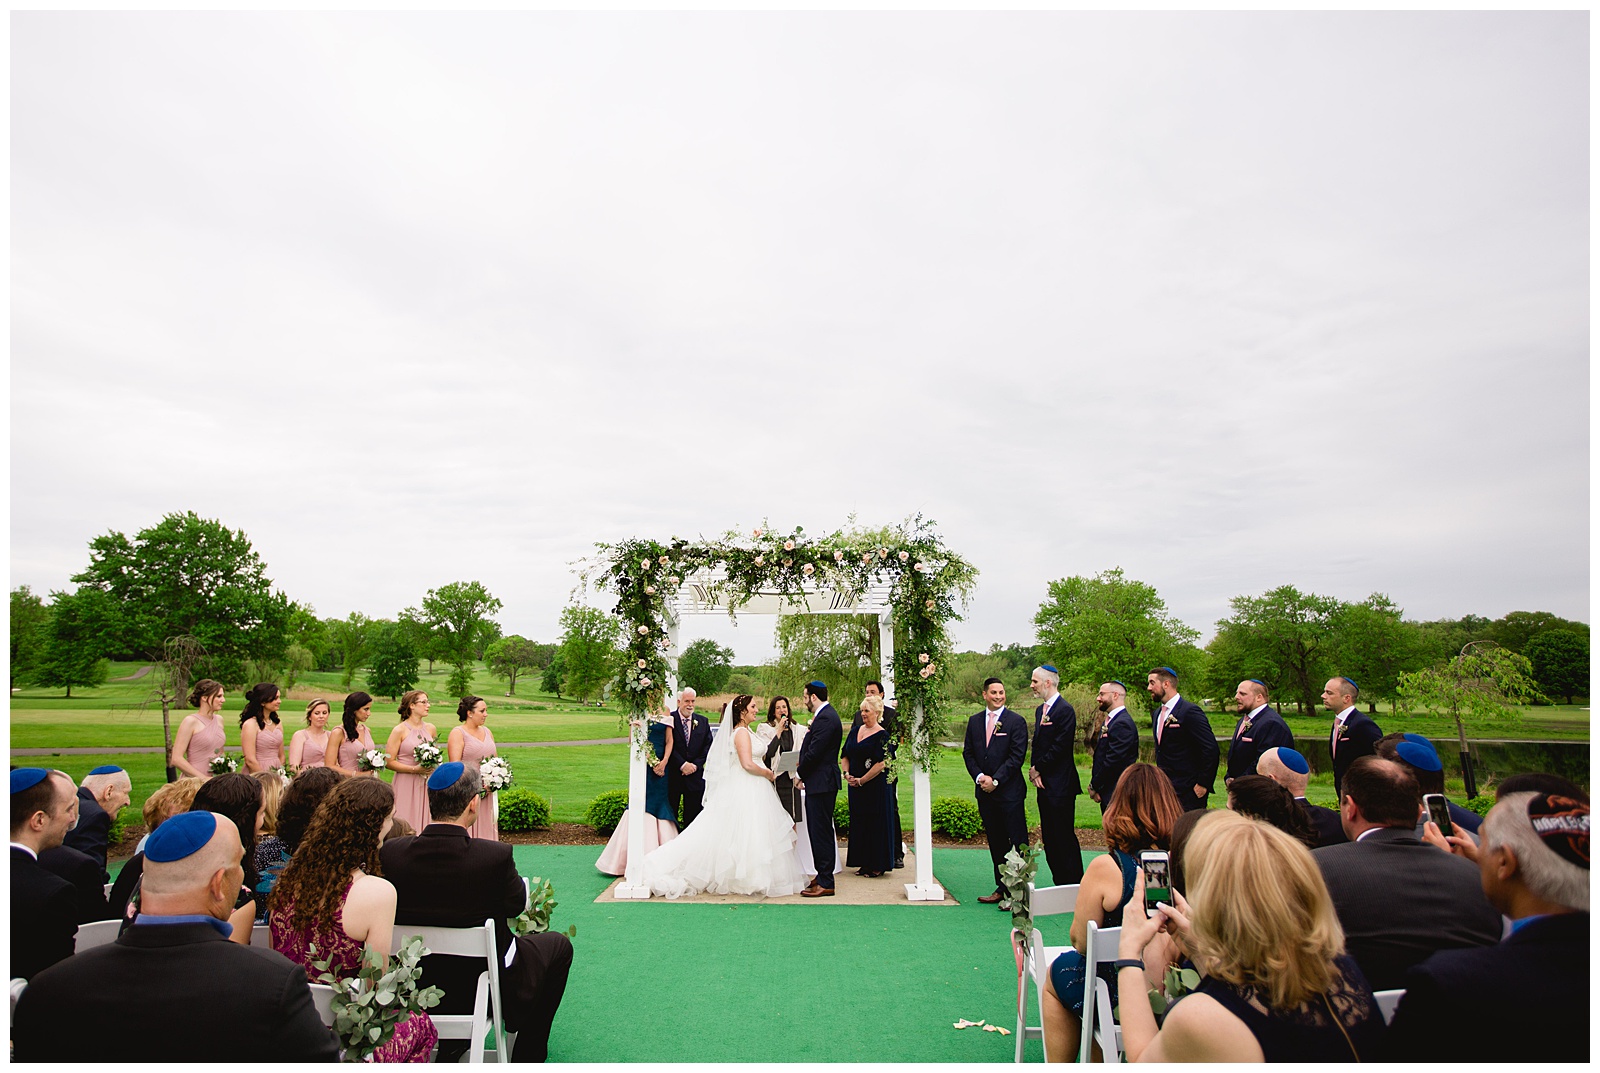 galloping hill country club galloping hill wedding galloping hill wedding photography galloping hill wedding photos galloping hill wedding pics galloping hill wedding photographer jewish wedding outdoor ceremony ketubah signing kenilworth new jersey